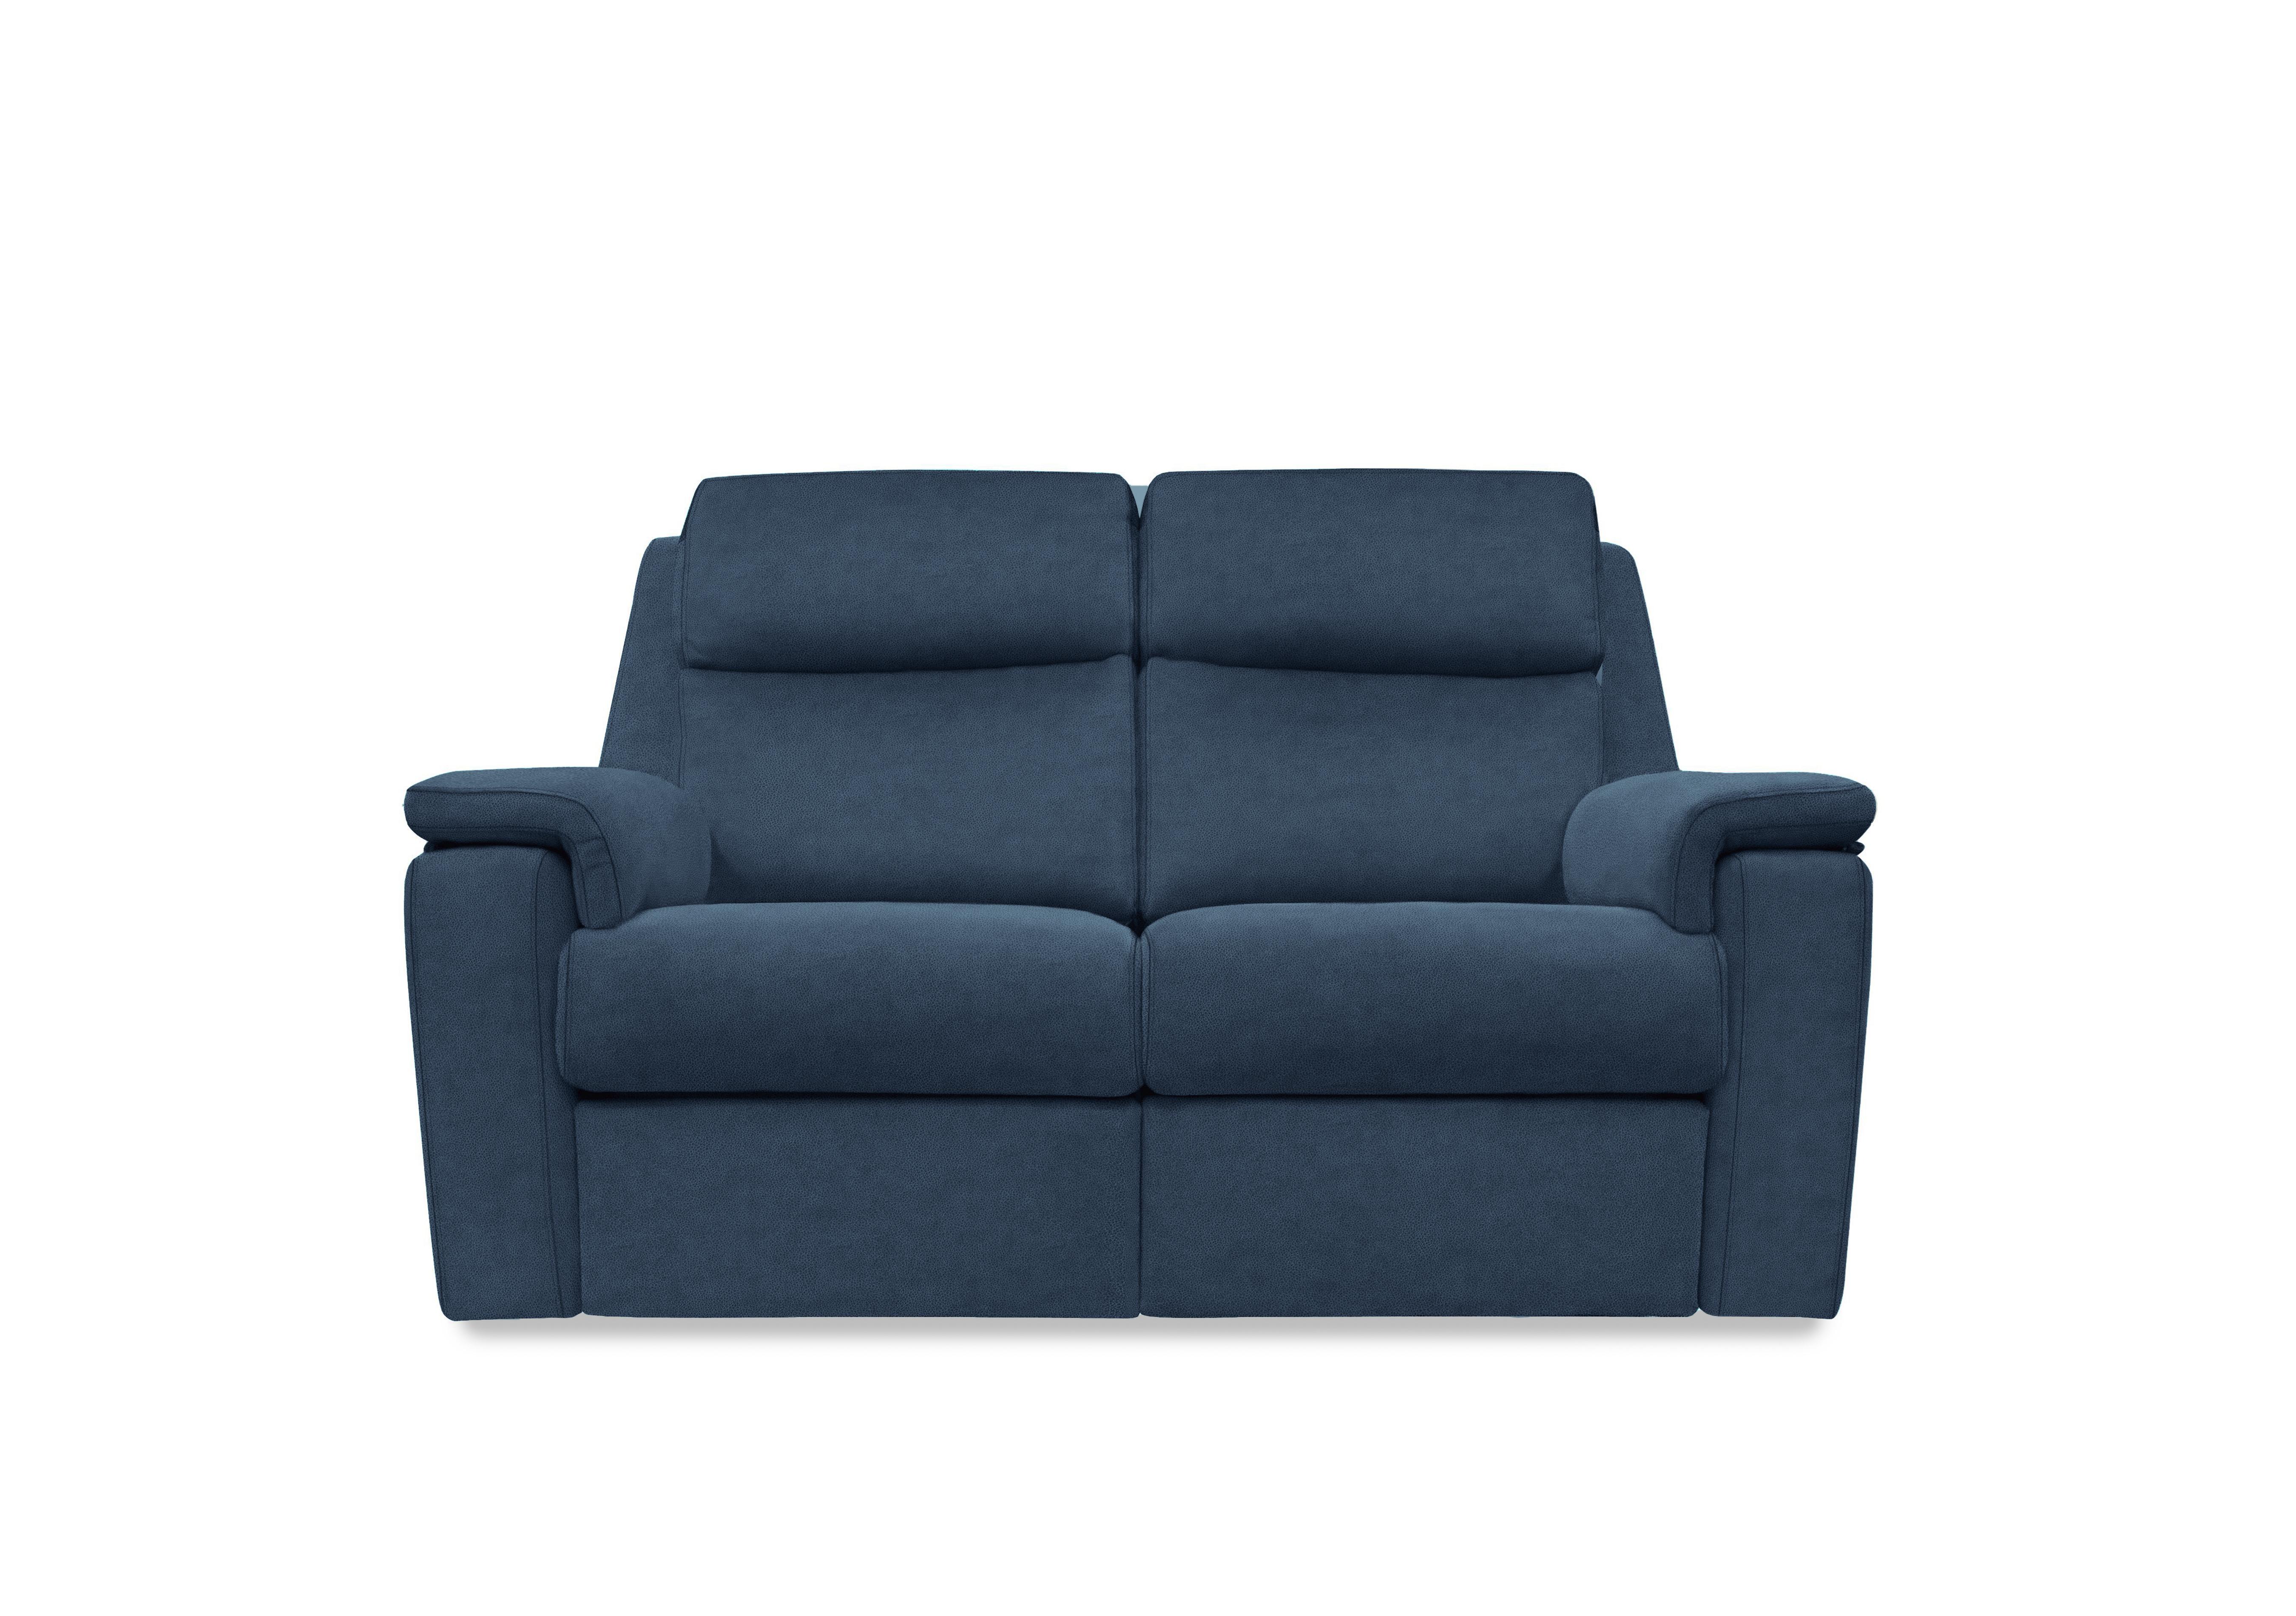 Thornbury 2 Seater Fabric Power Recliner Sofa with Power Headrests and Power Lumbar in A125 Stingray Indigo on Furniture Village